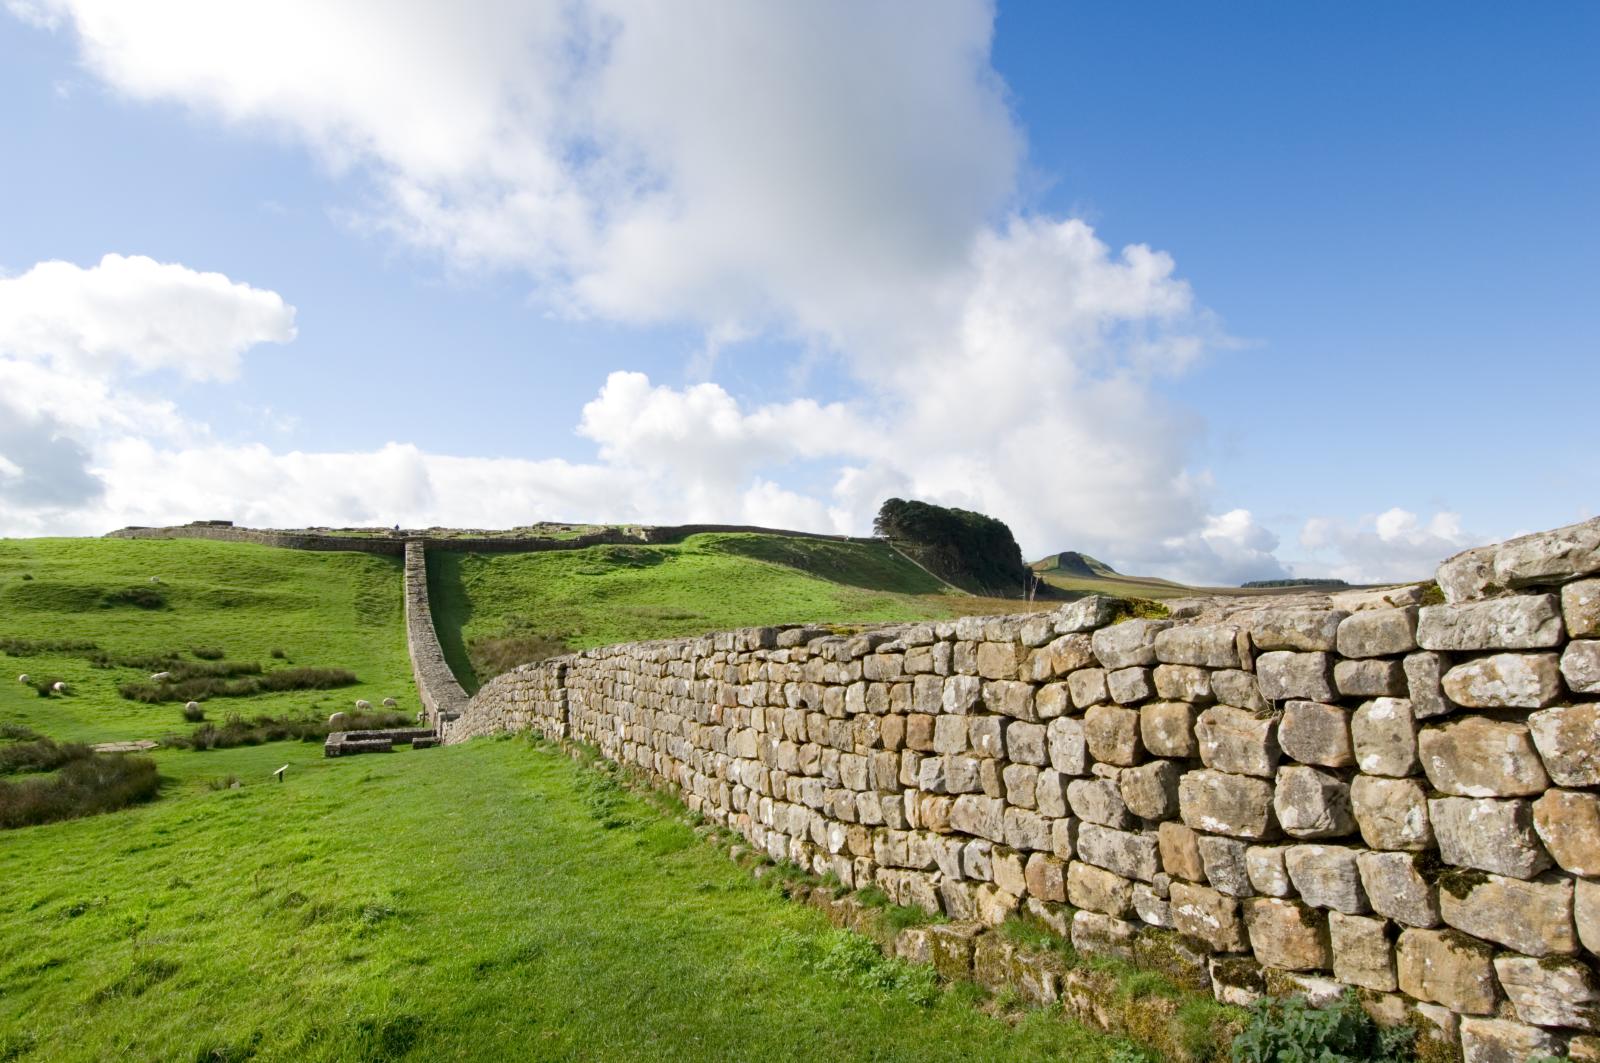 View of section running east from Housesteads Fort.